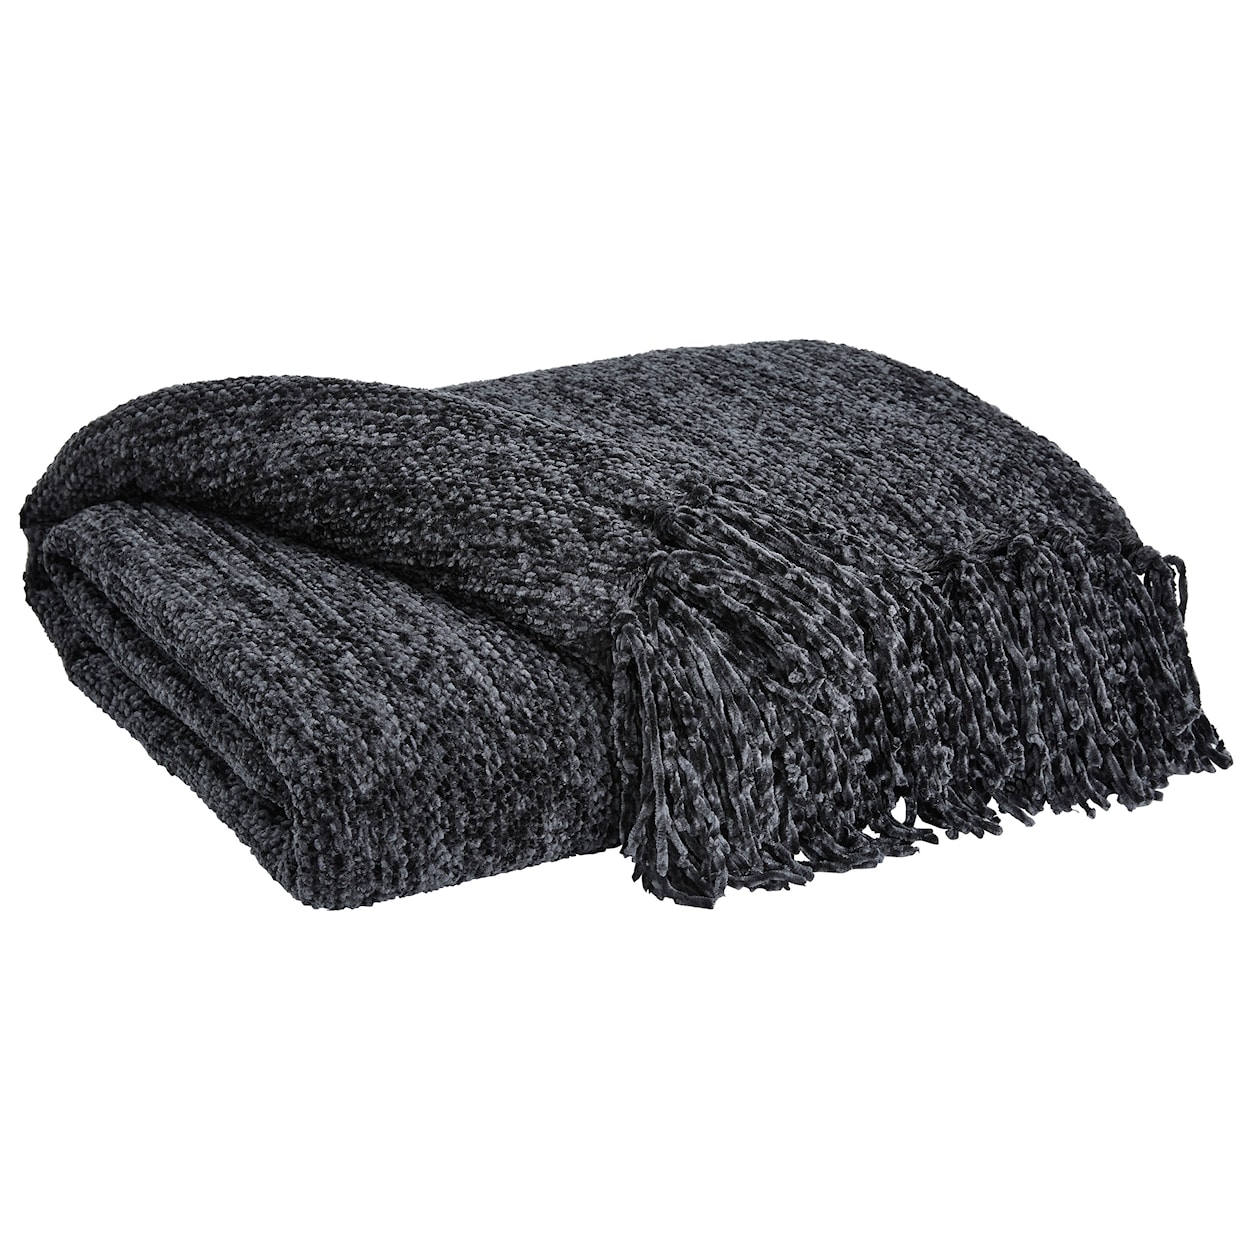 Signature Design by Ashley Throws Tamish Black Throw